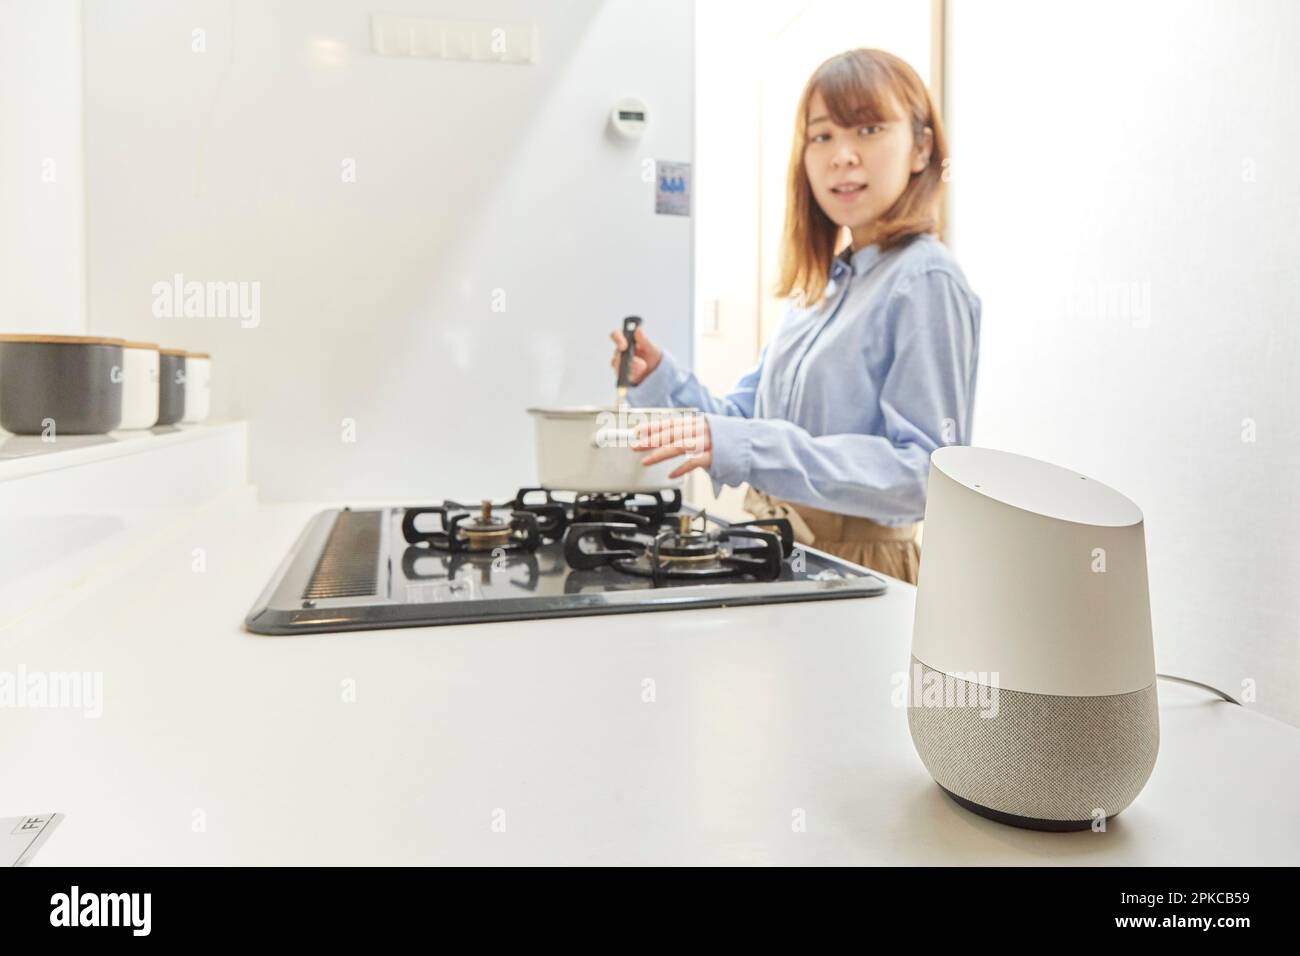 Woman talking to AI speaker while cooking in the kitchen Stock Photo